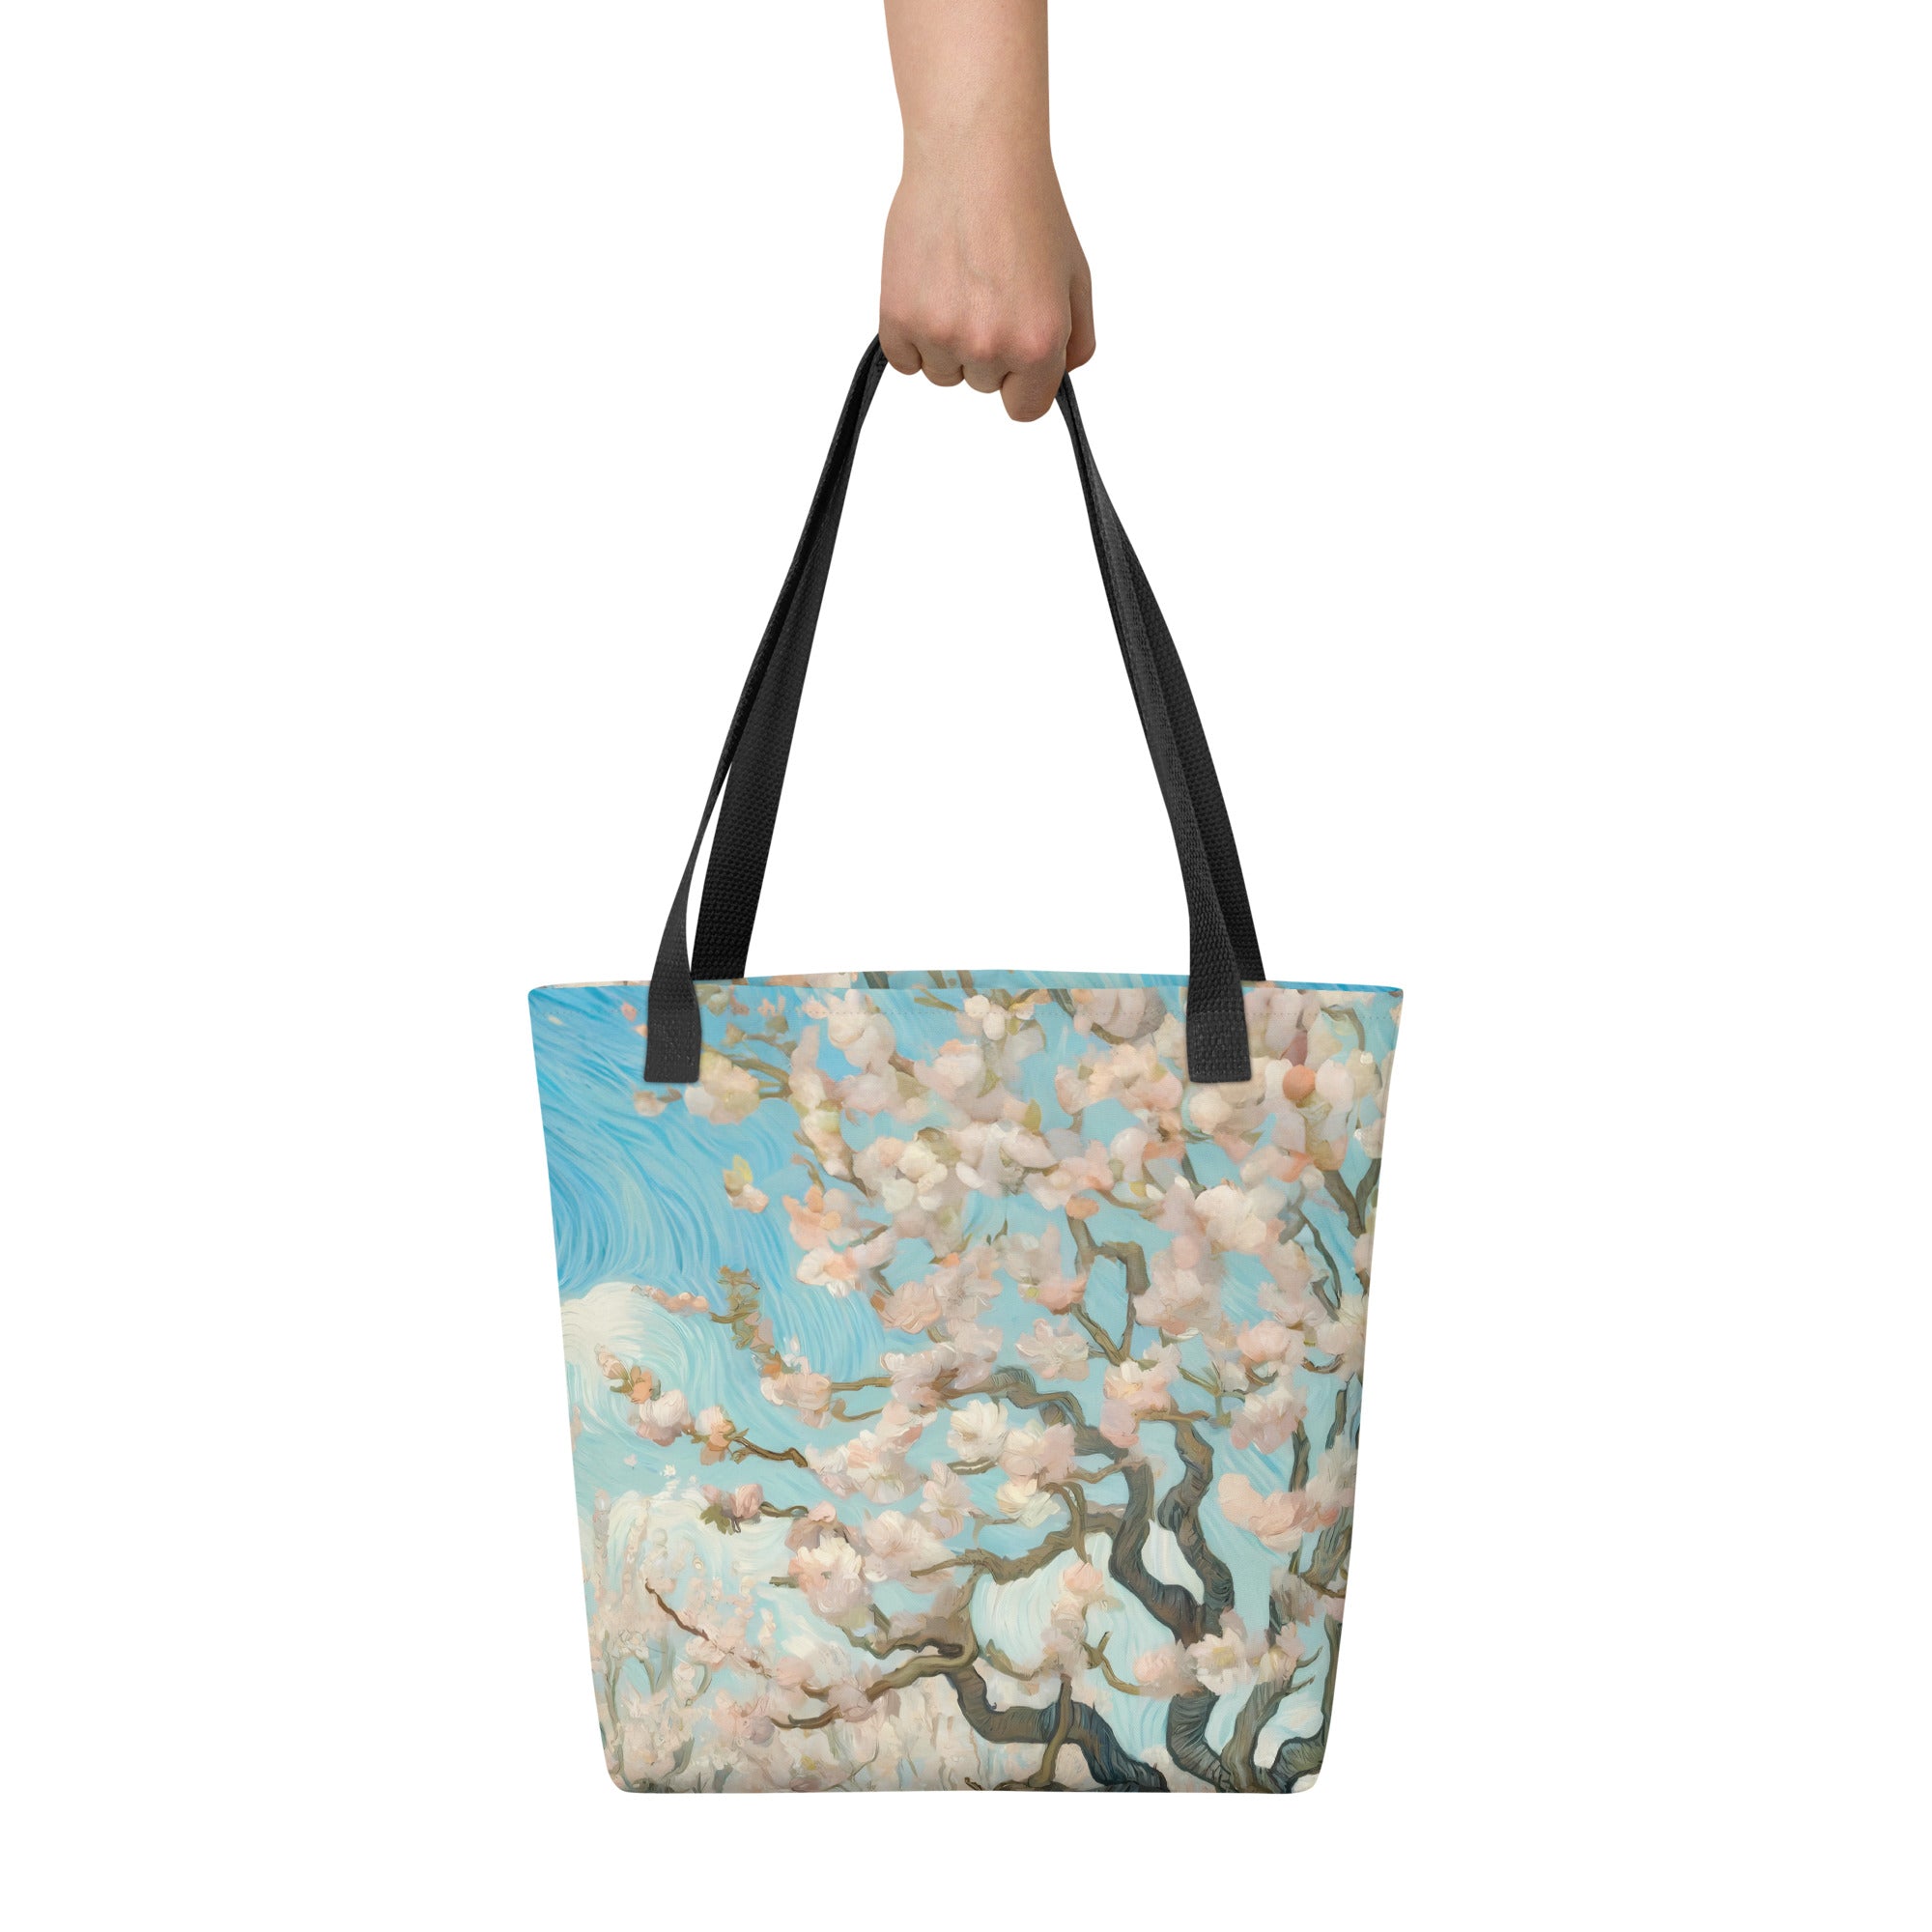 Vincent van Gogh 'Orchard in Blossom' Famous Painting Totebag | Allover Print Art Tote Bag